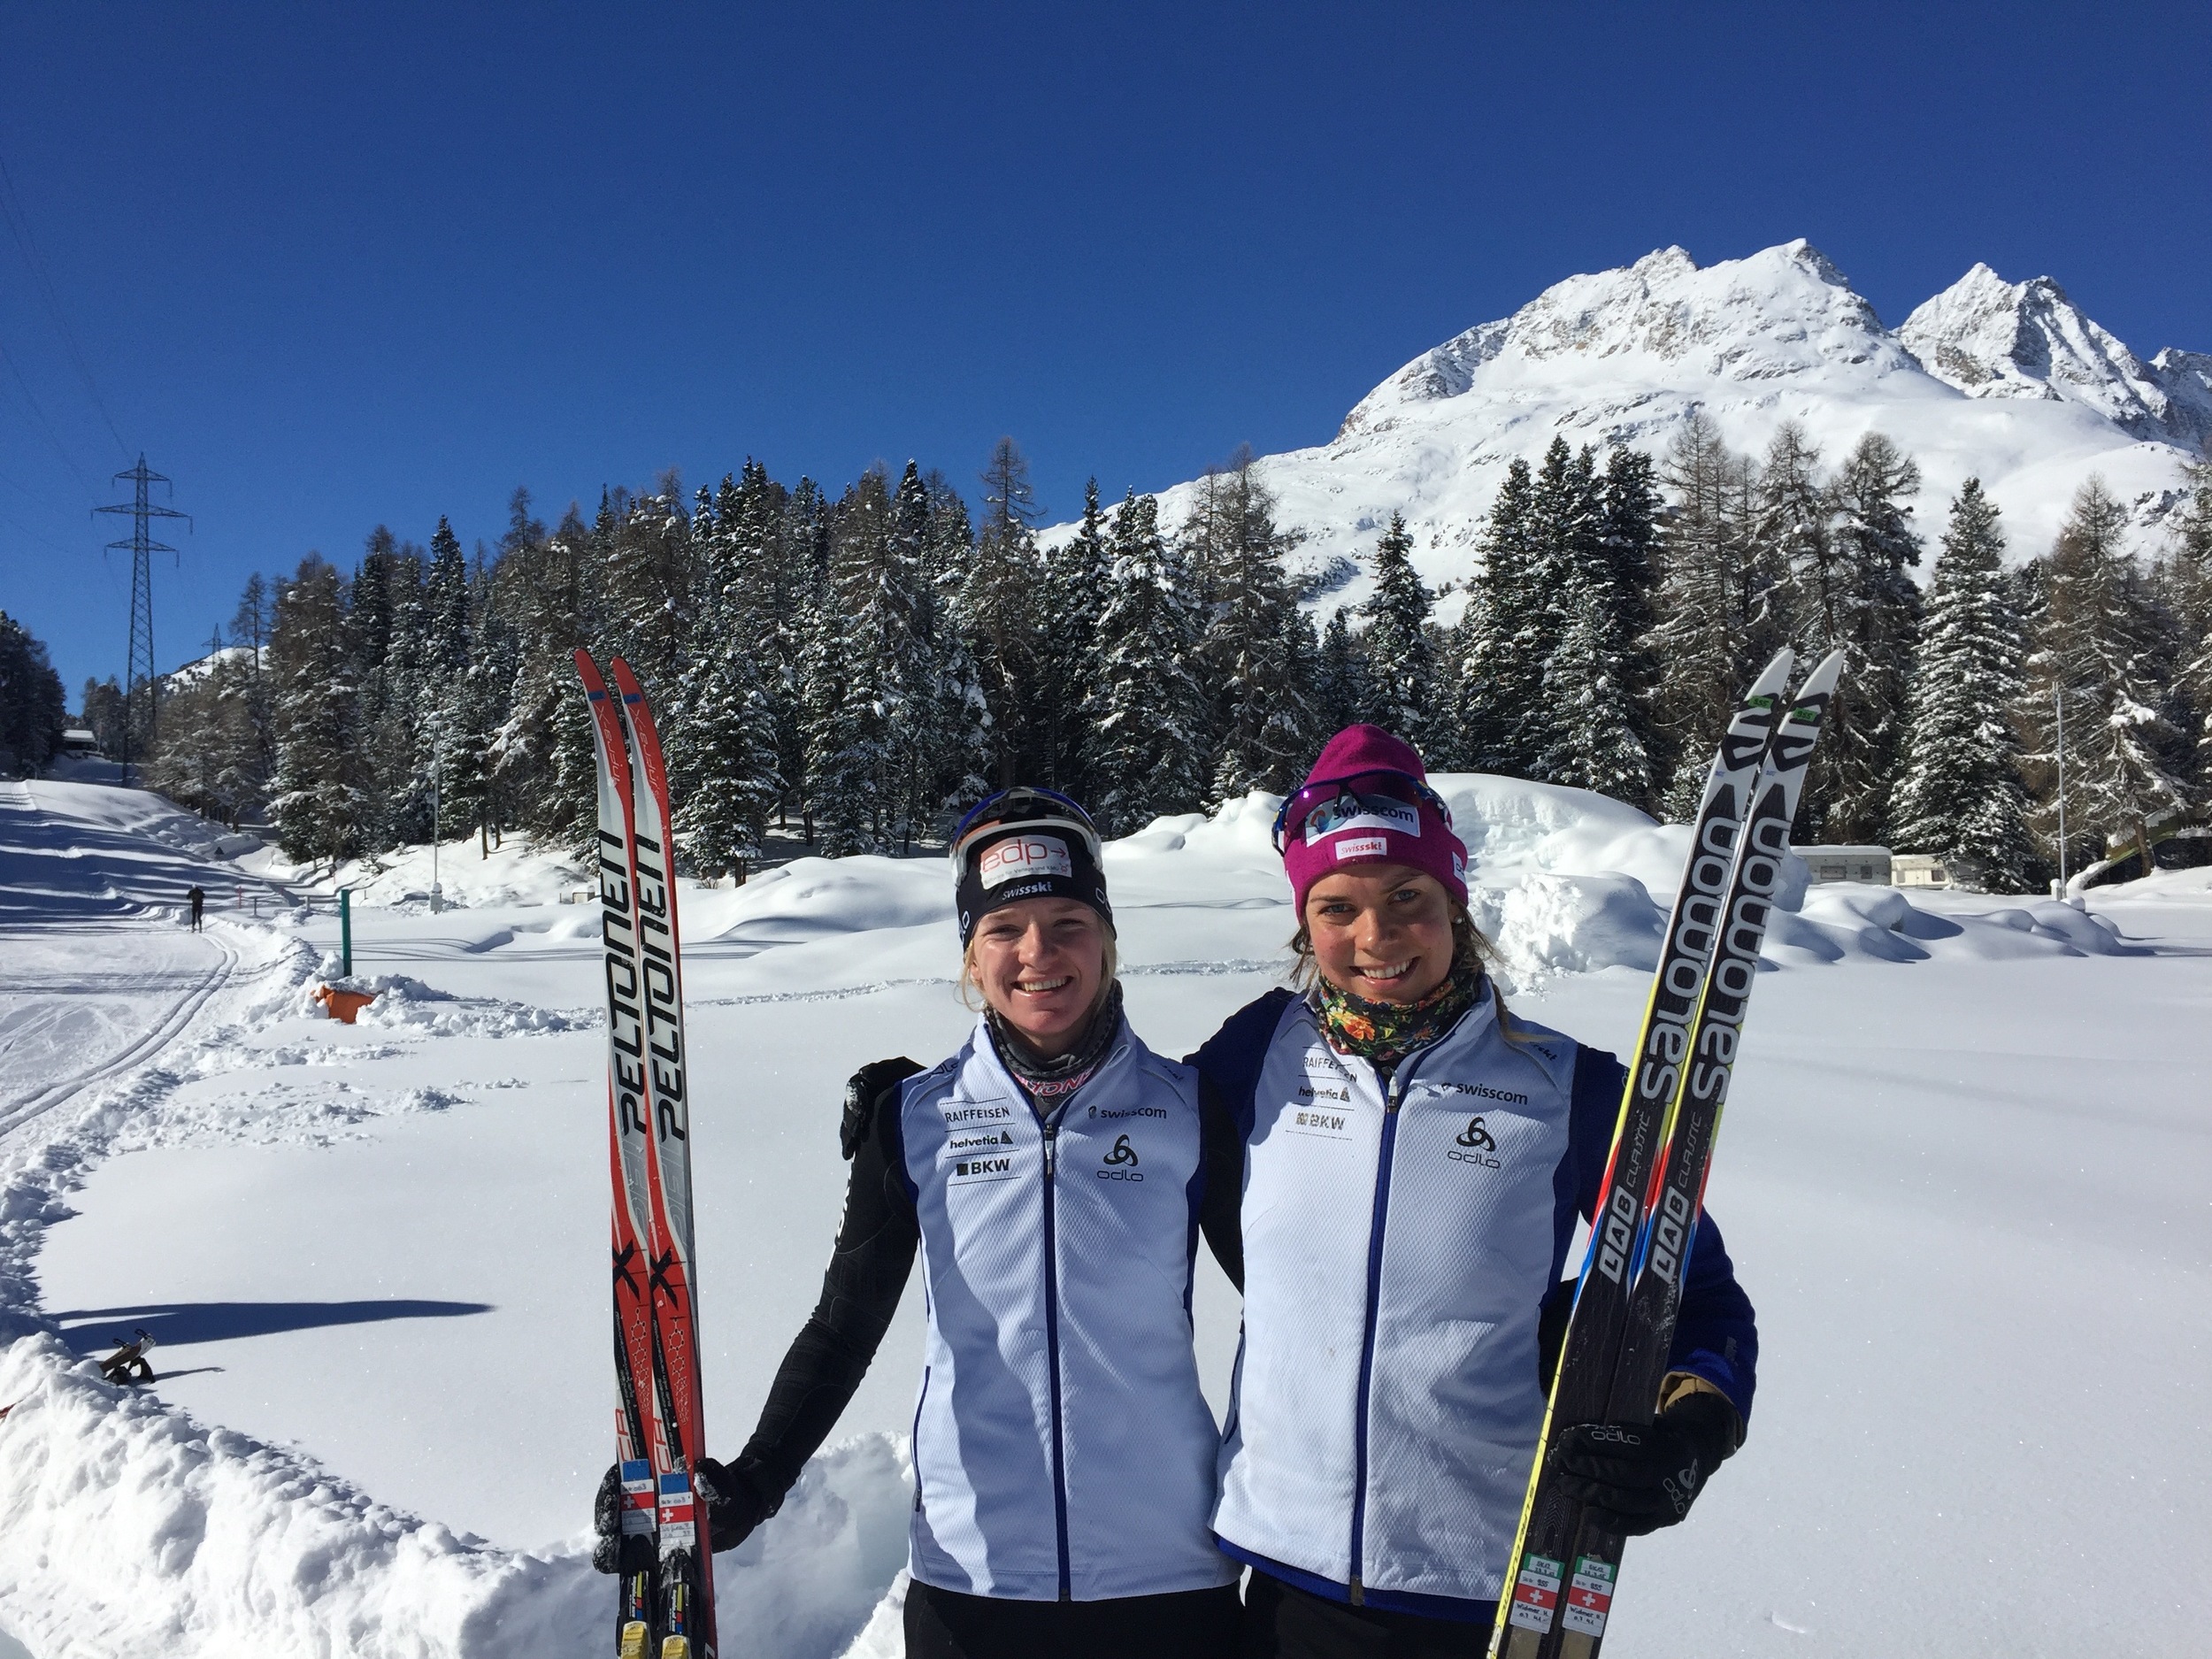  Nadine Fähndrich and I soaking in the rays in St.Moritz after some intensity. So proud of this girl and her silver medal in the Sprint event at the U23 Championships in Romania this week! 